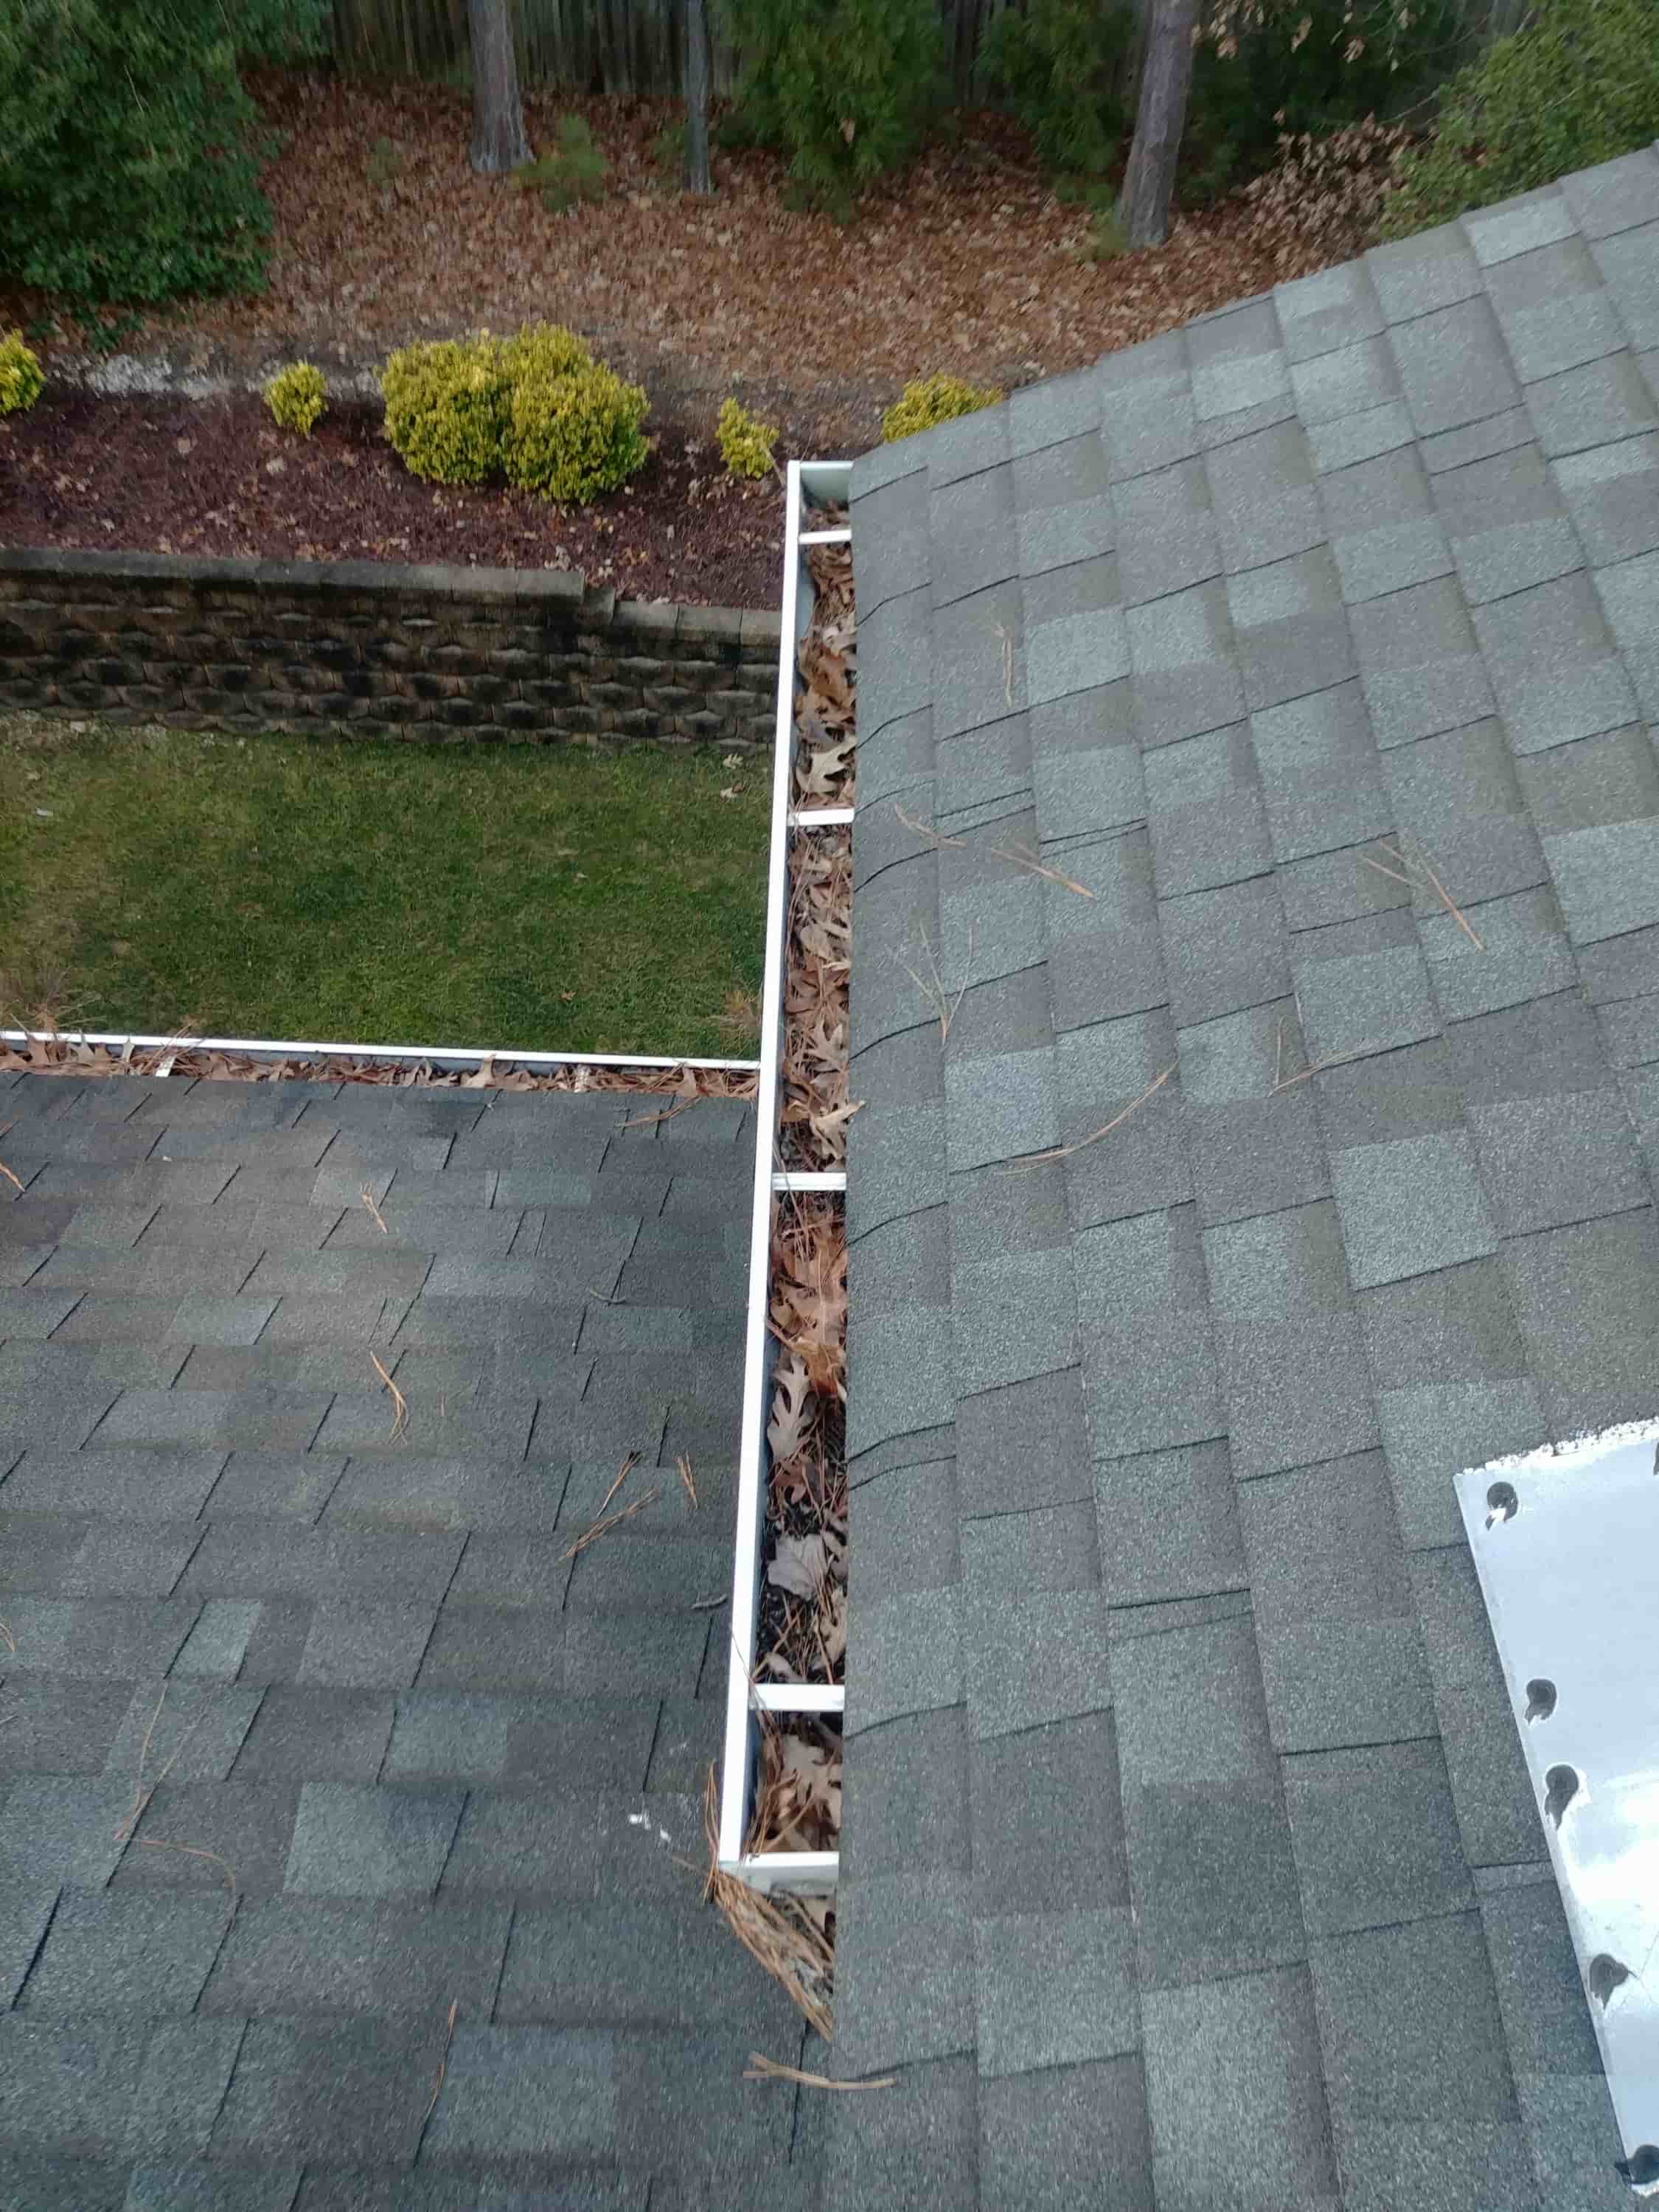 how to clean rain gutters